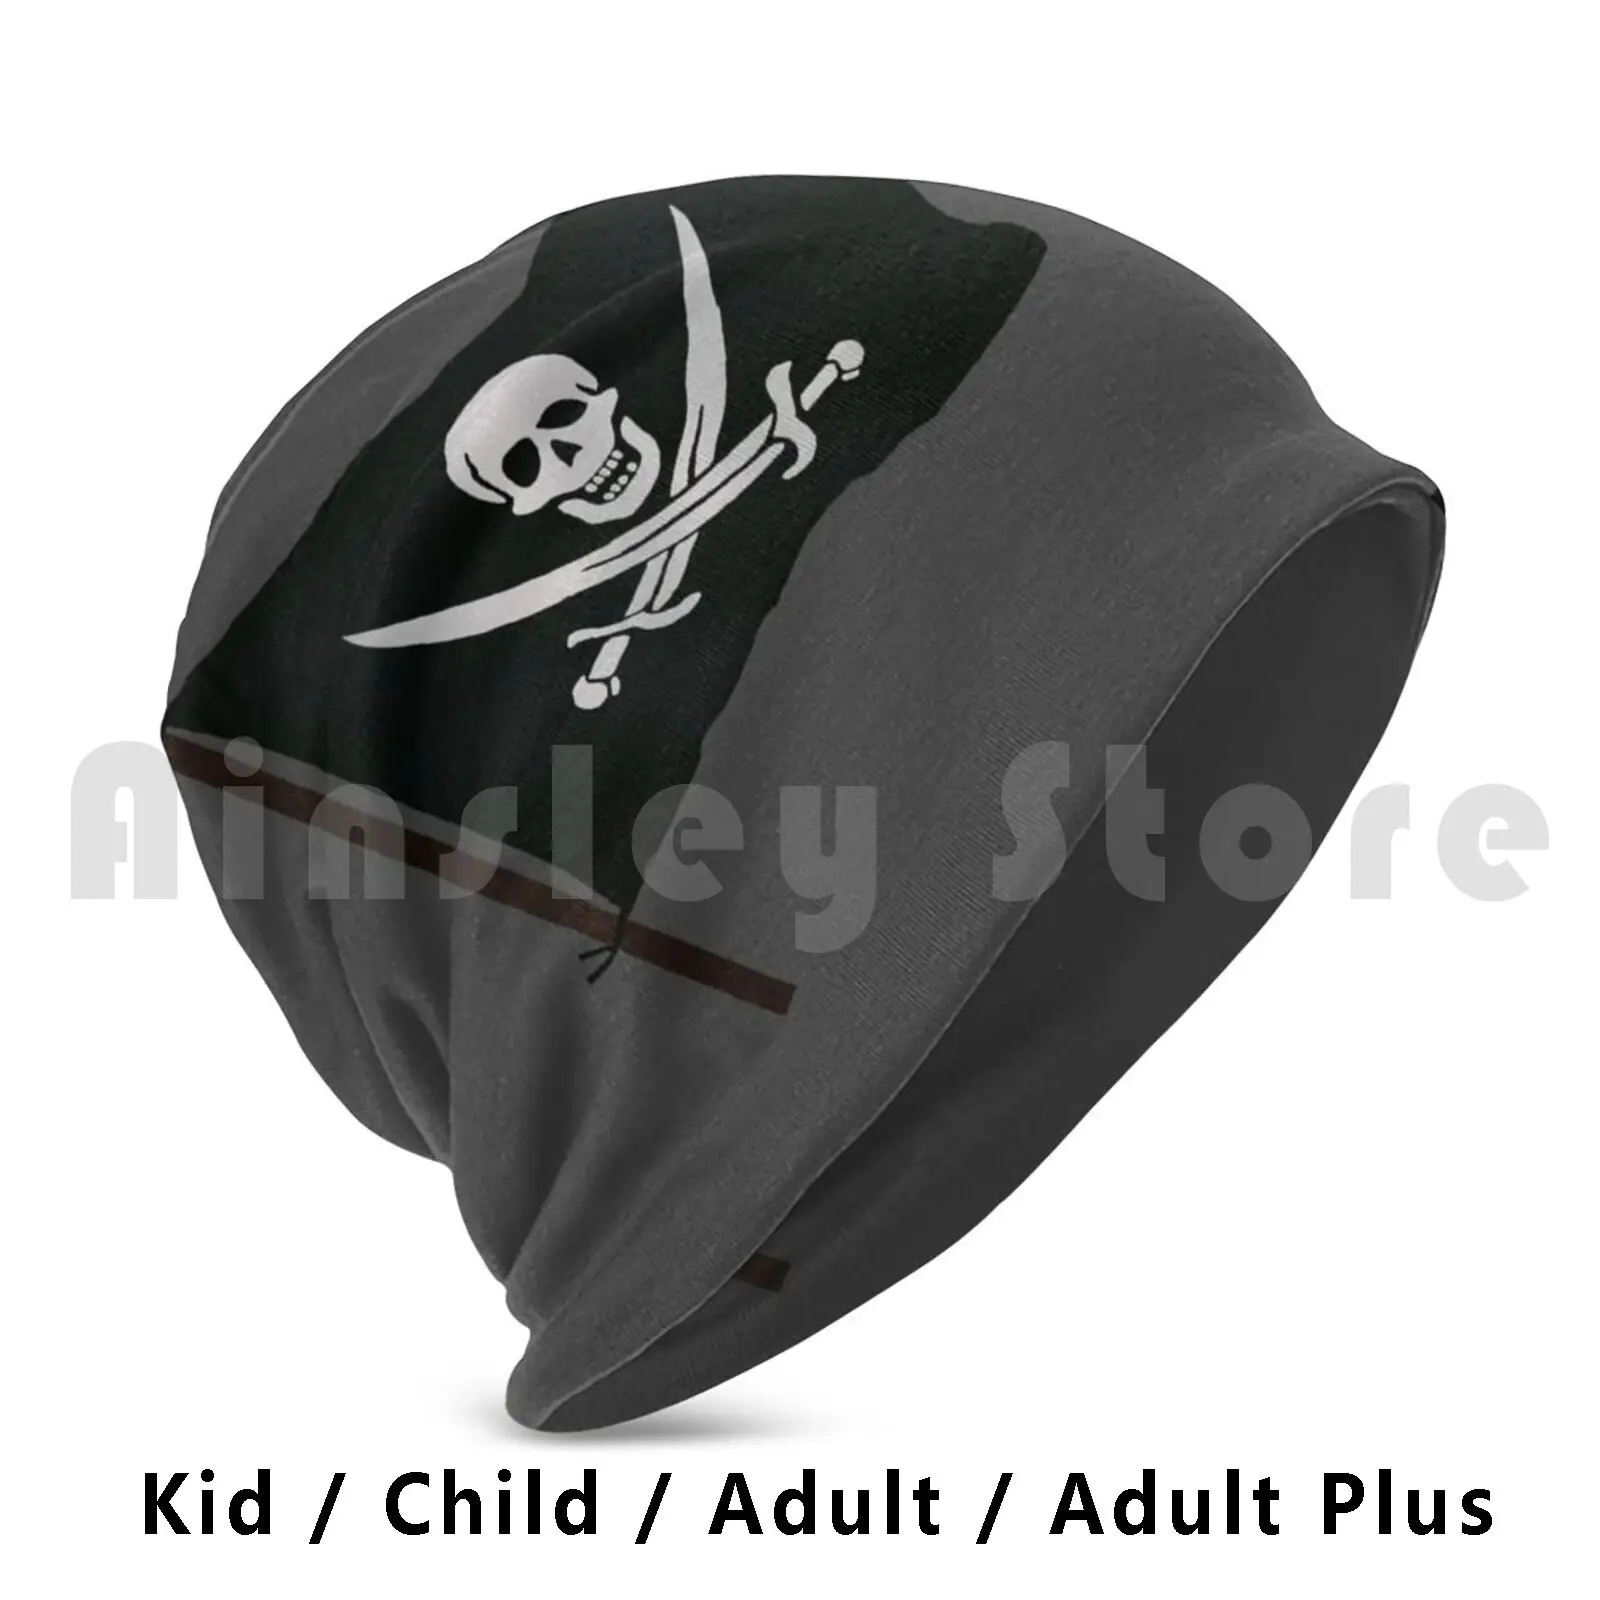 

Pirates Flag Beanies Knit Hat Hip Hop Pirates Flag Skull Ships Curse Of The Black Pearl Dead Men Tell No Tales On